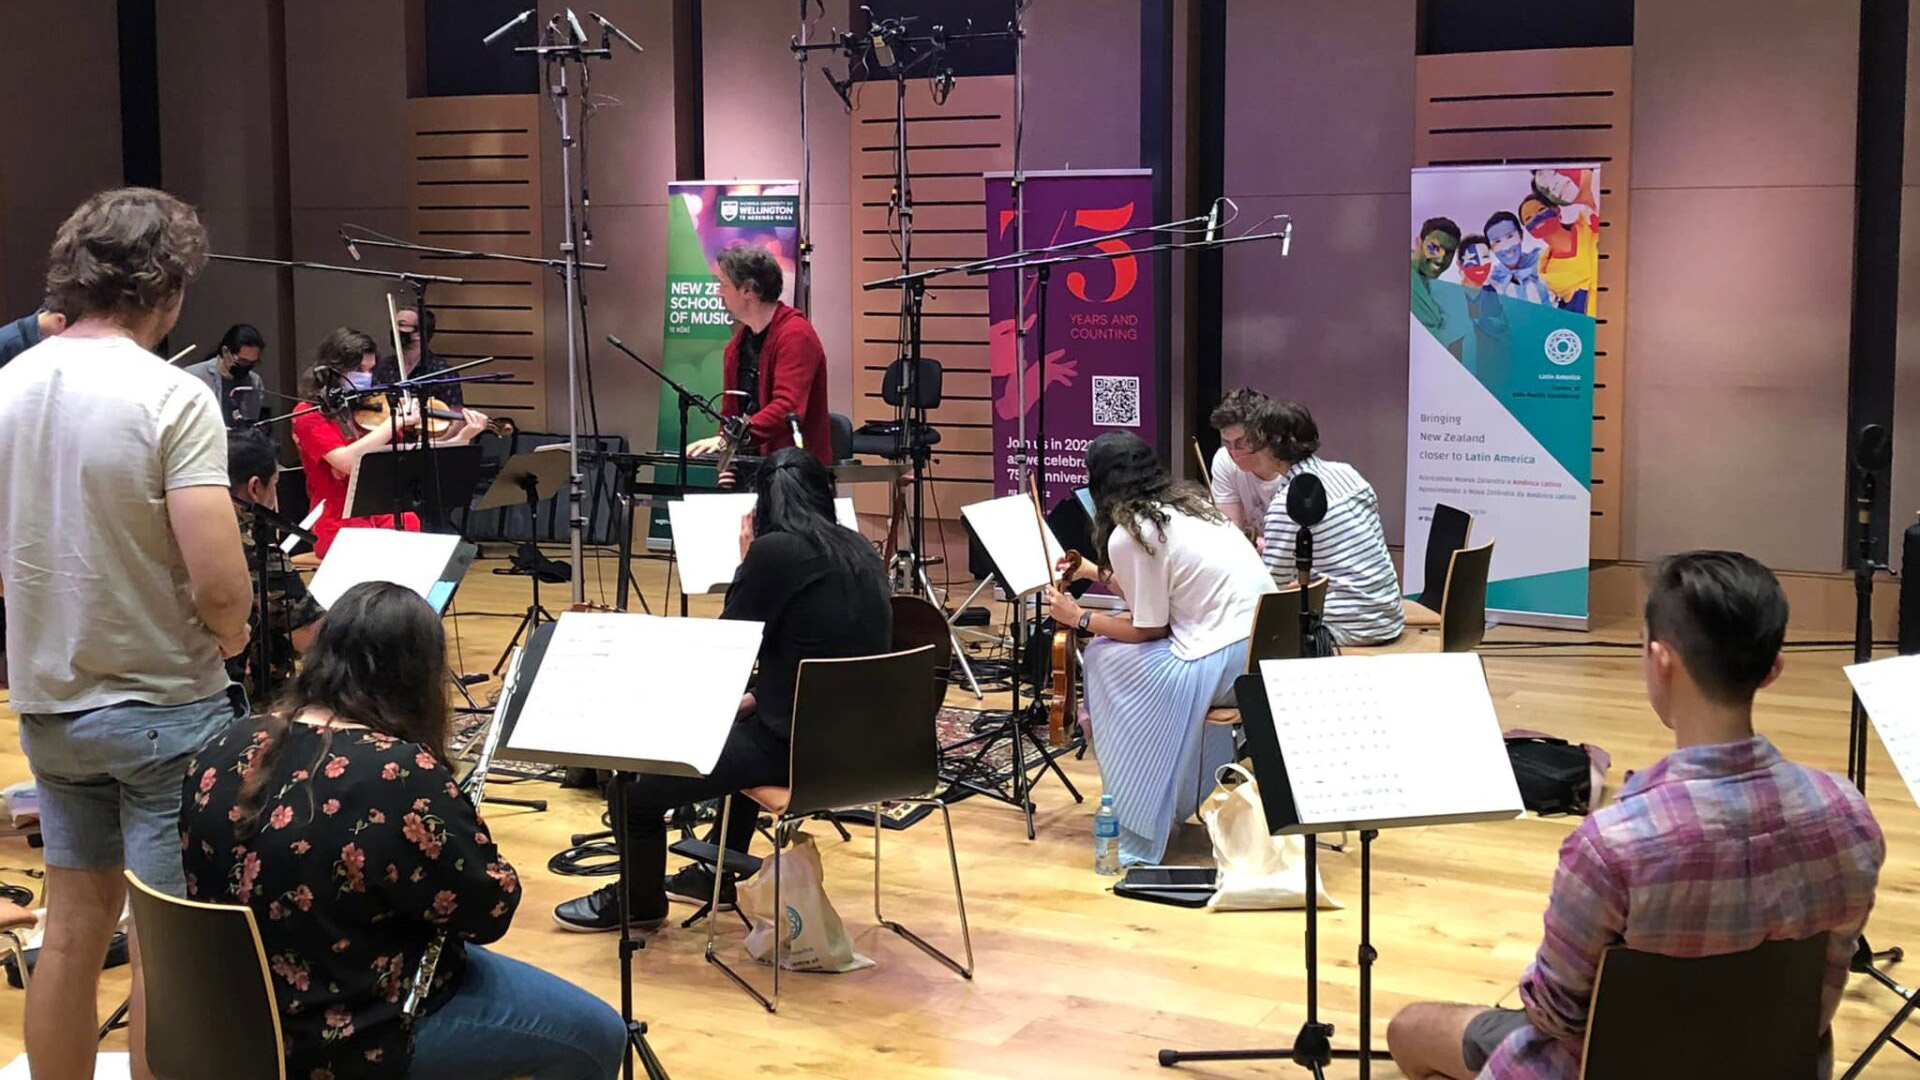 An image of students rehearsing the Irisado piece of music